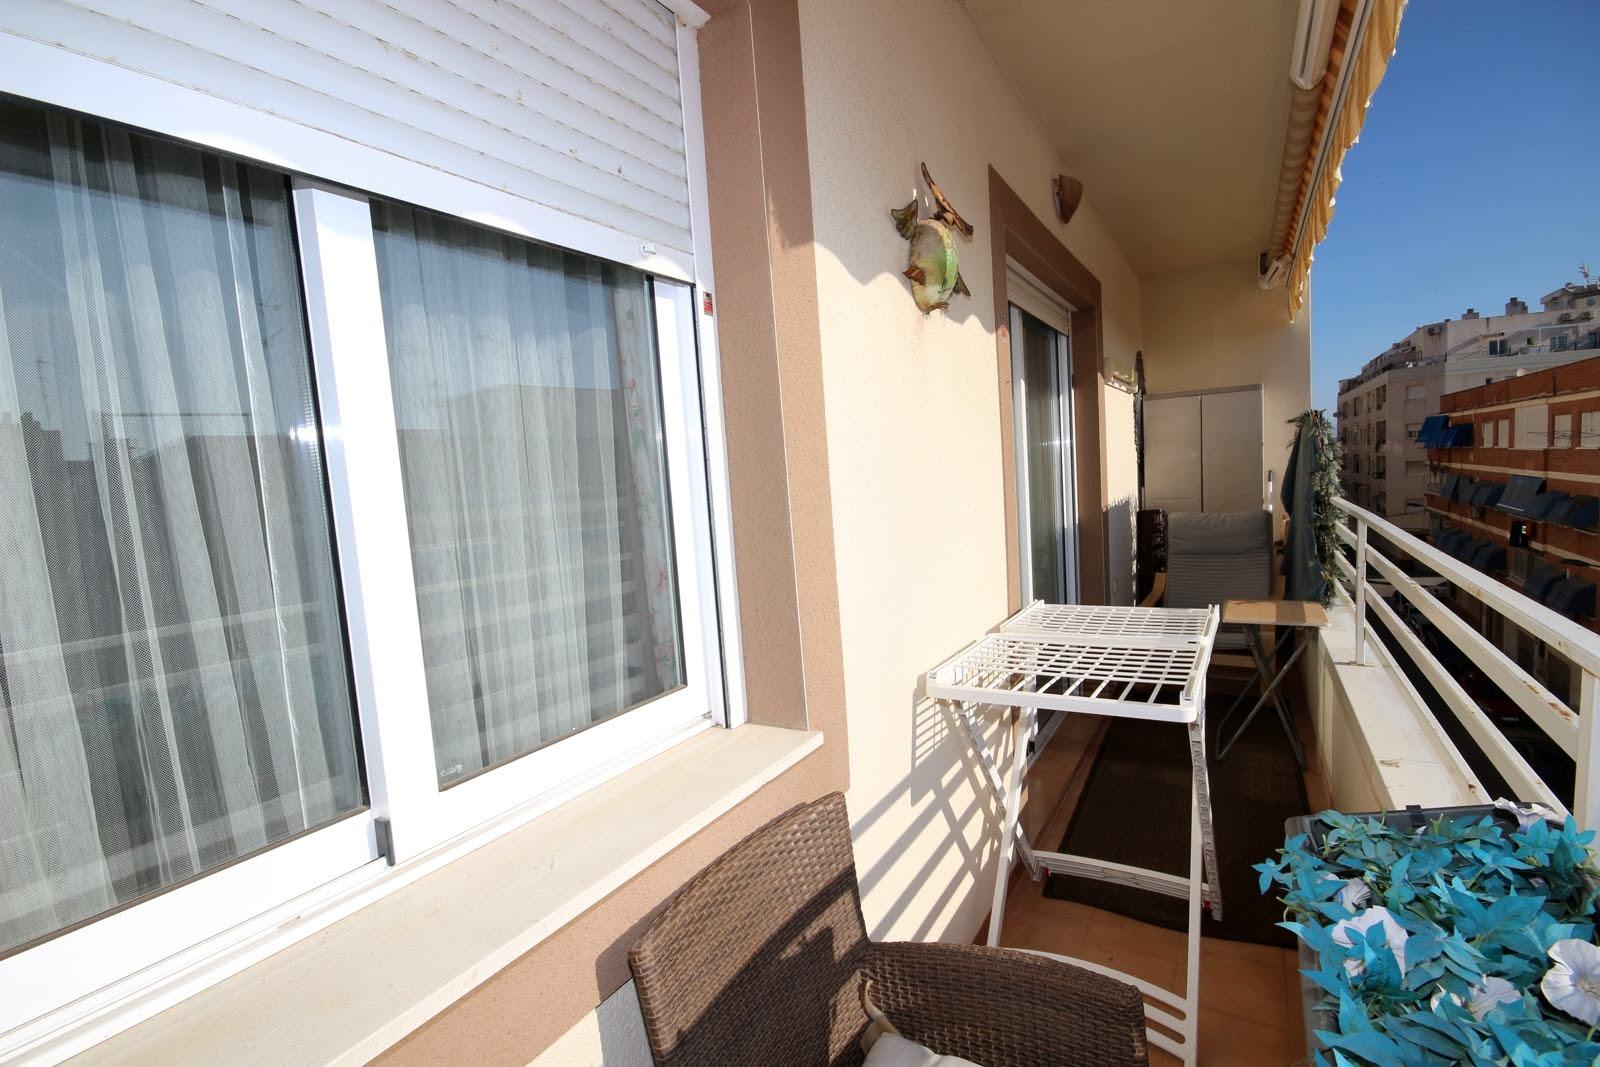 Apartment for sale in Torrevieja